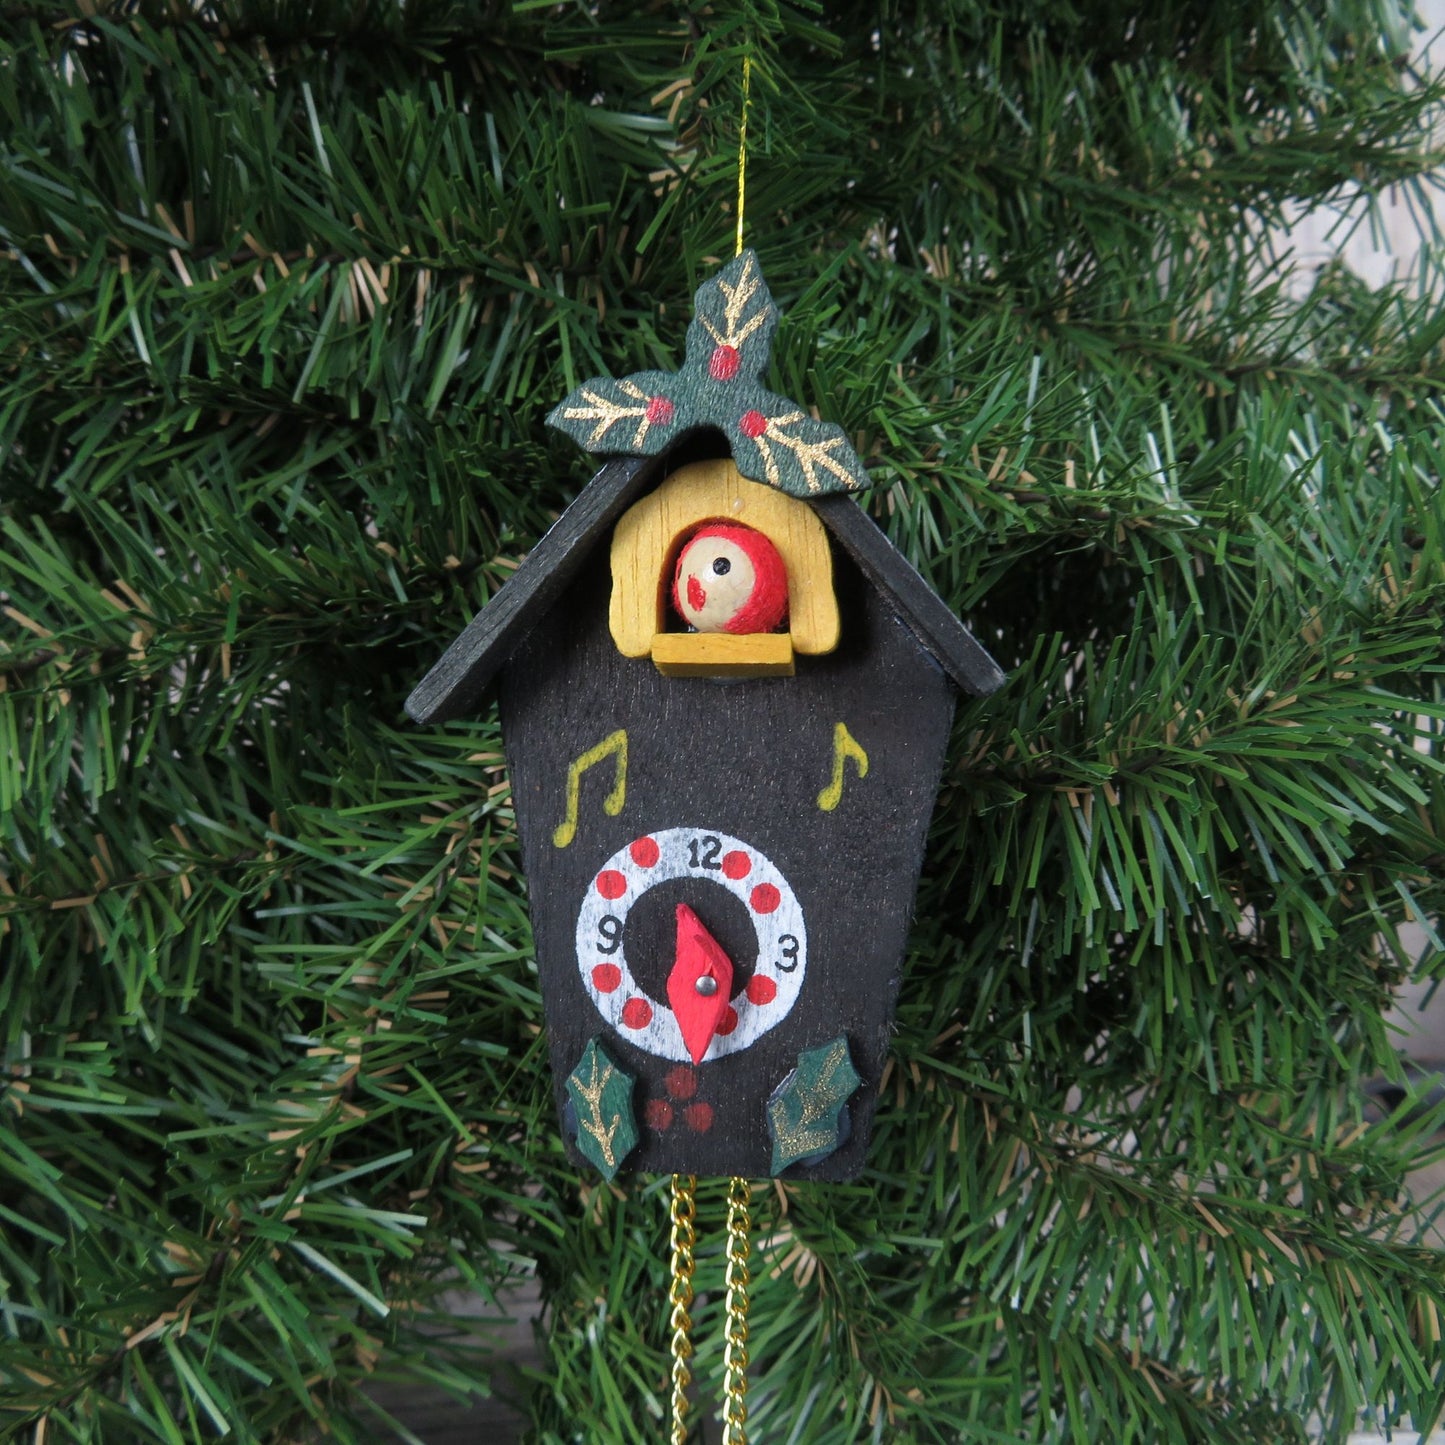 Vintage Wood Coo Coo Clock Ornament Black Wooden Clock with Bird and Chain Christmas Ornament